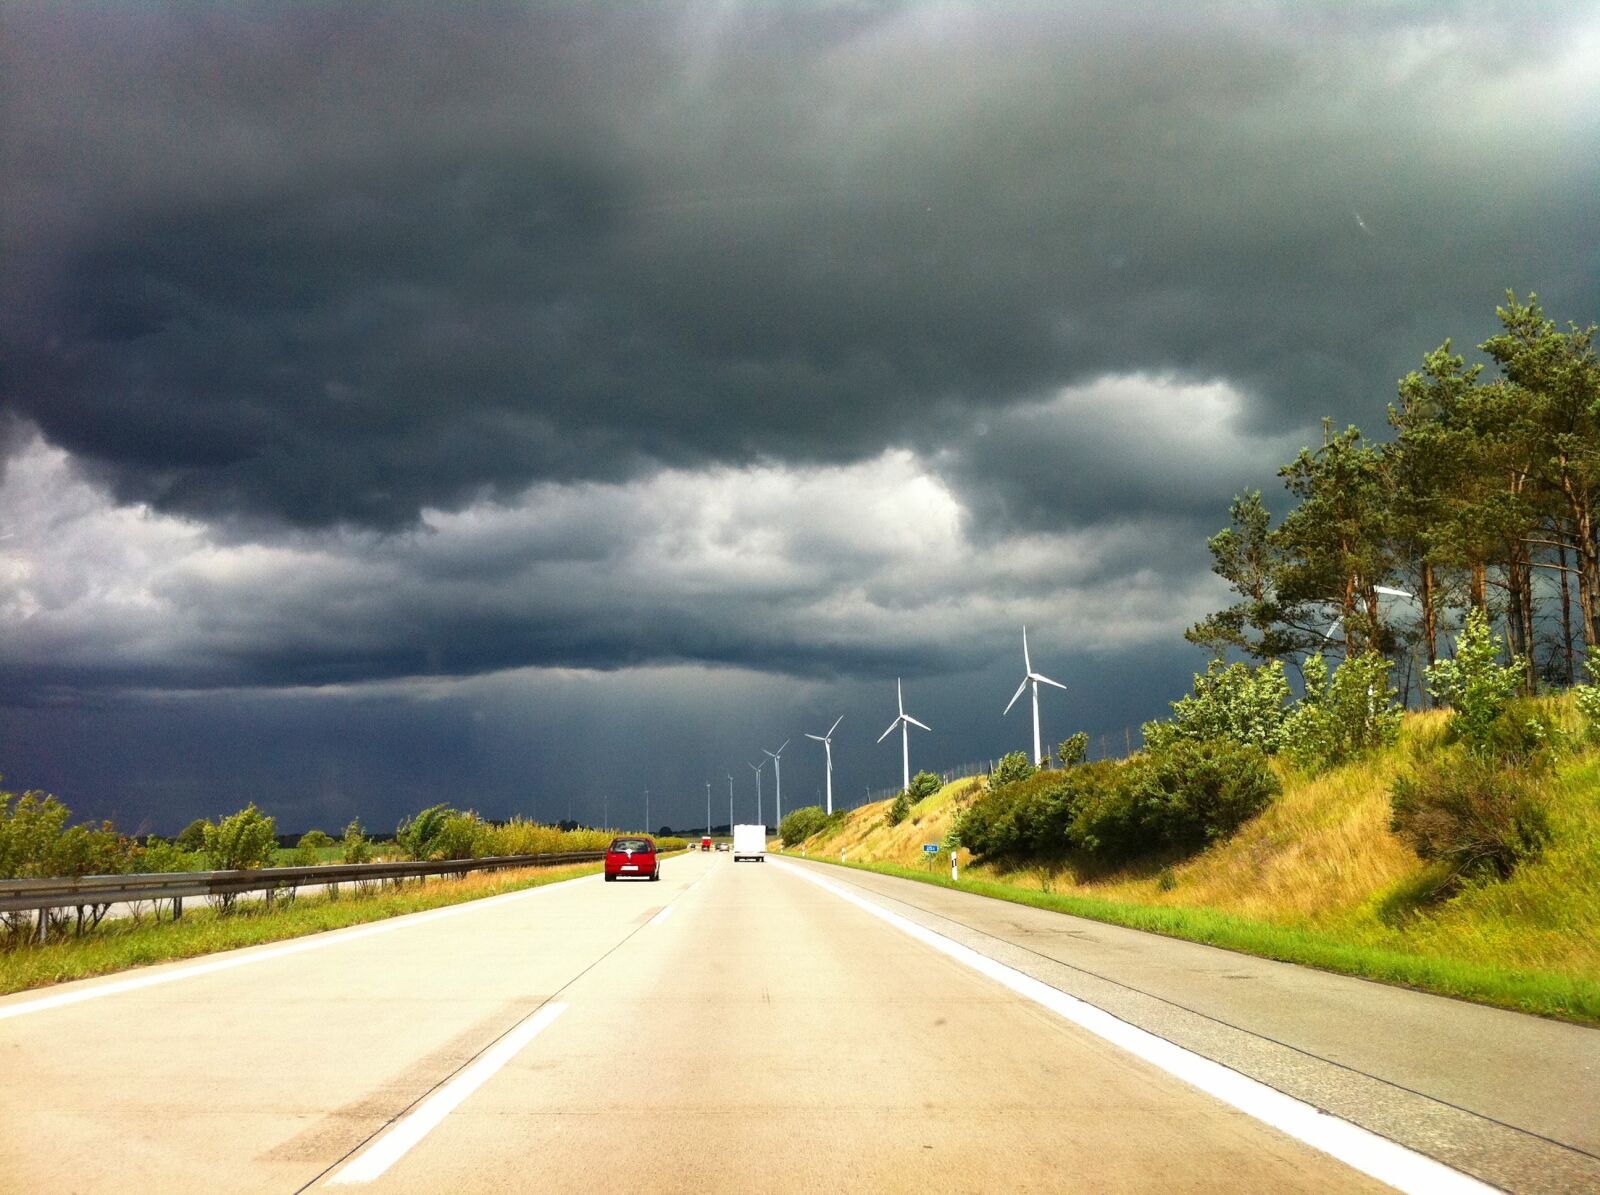 Apple iPhone 4 sample photo. Highway, thunderstorm, weather photography